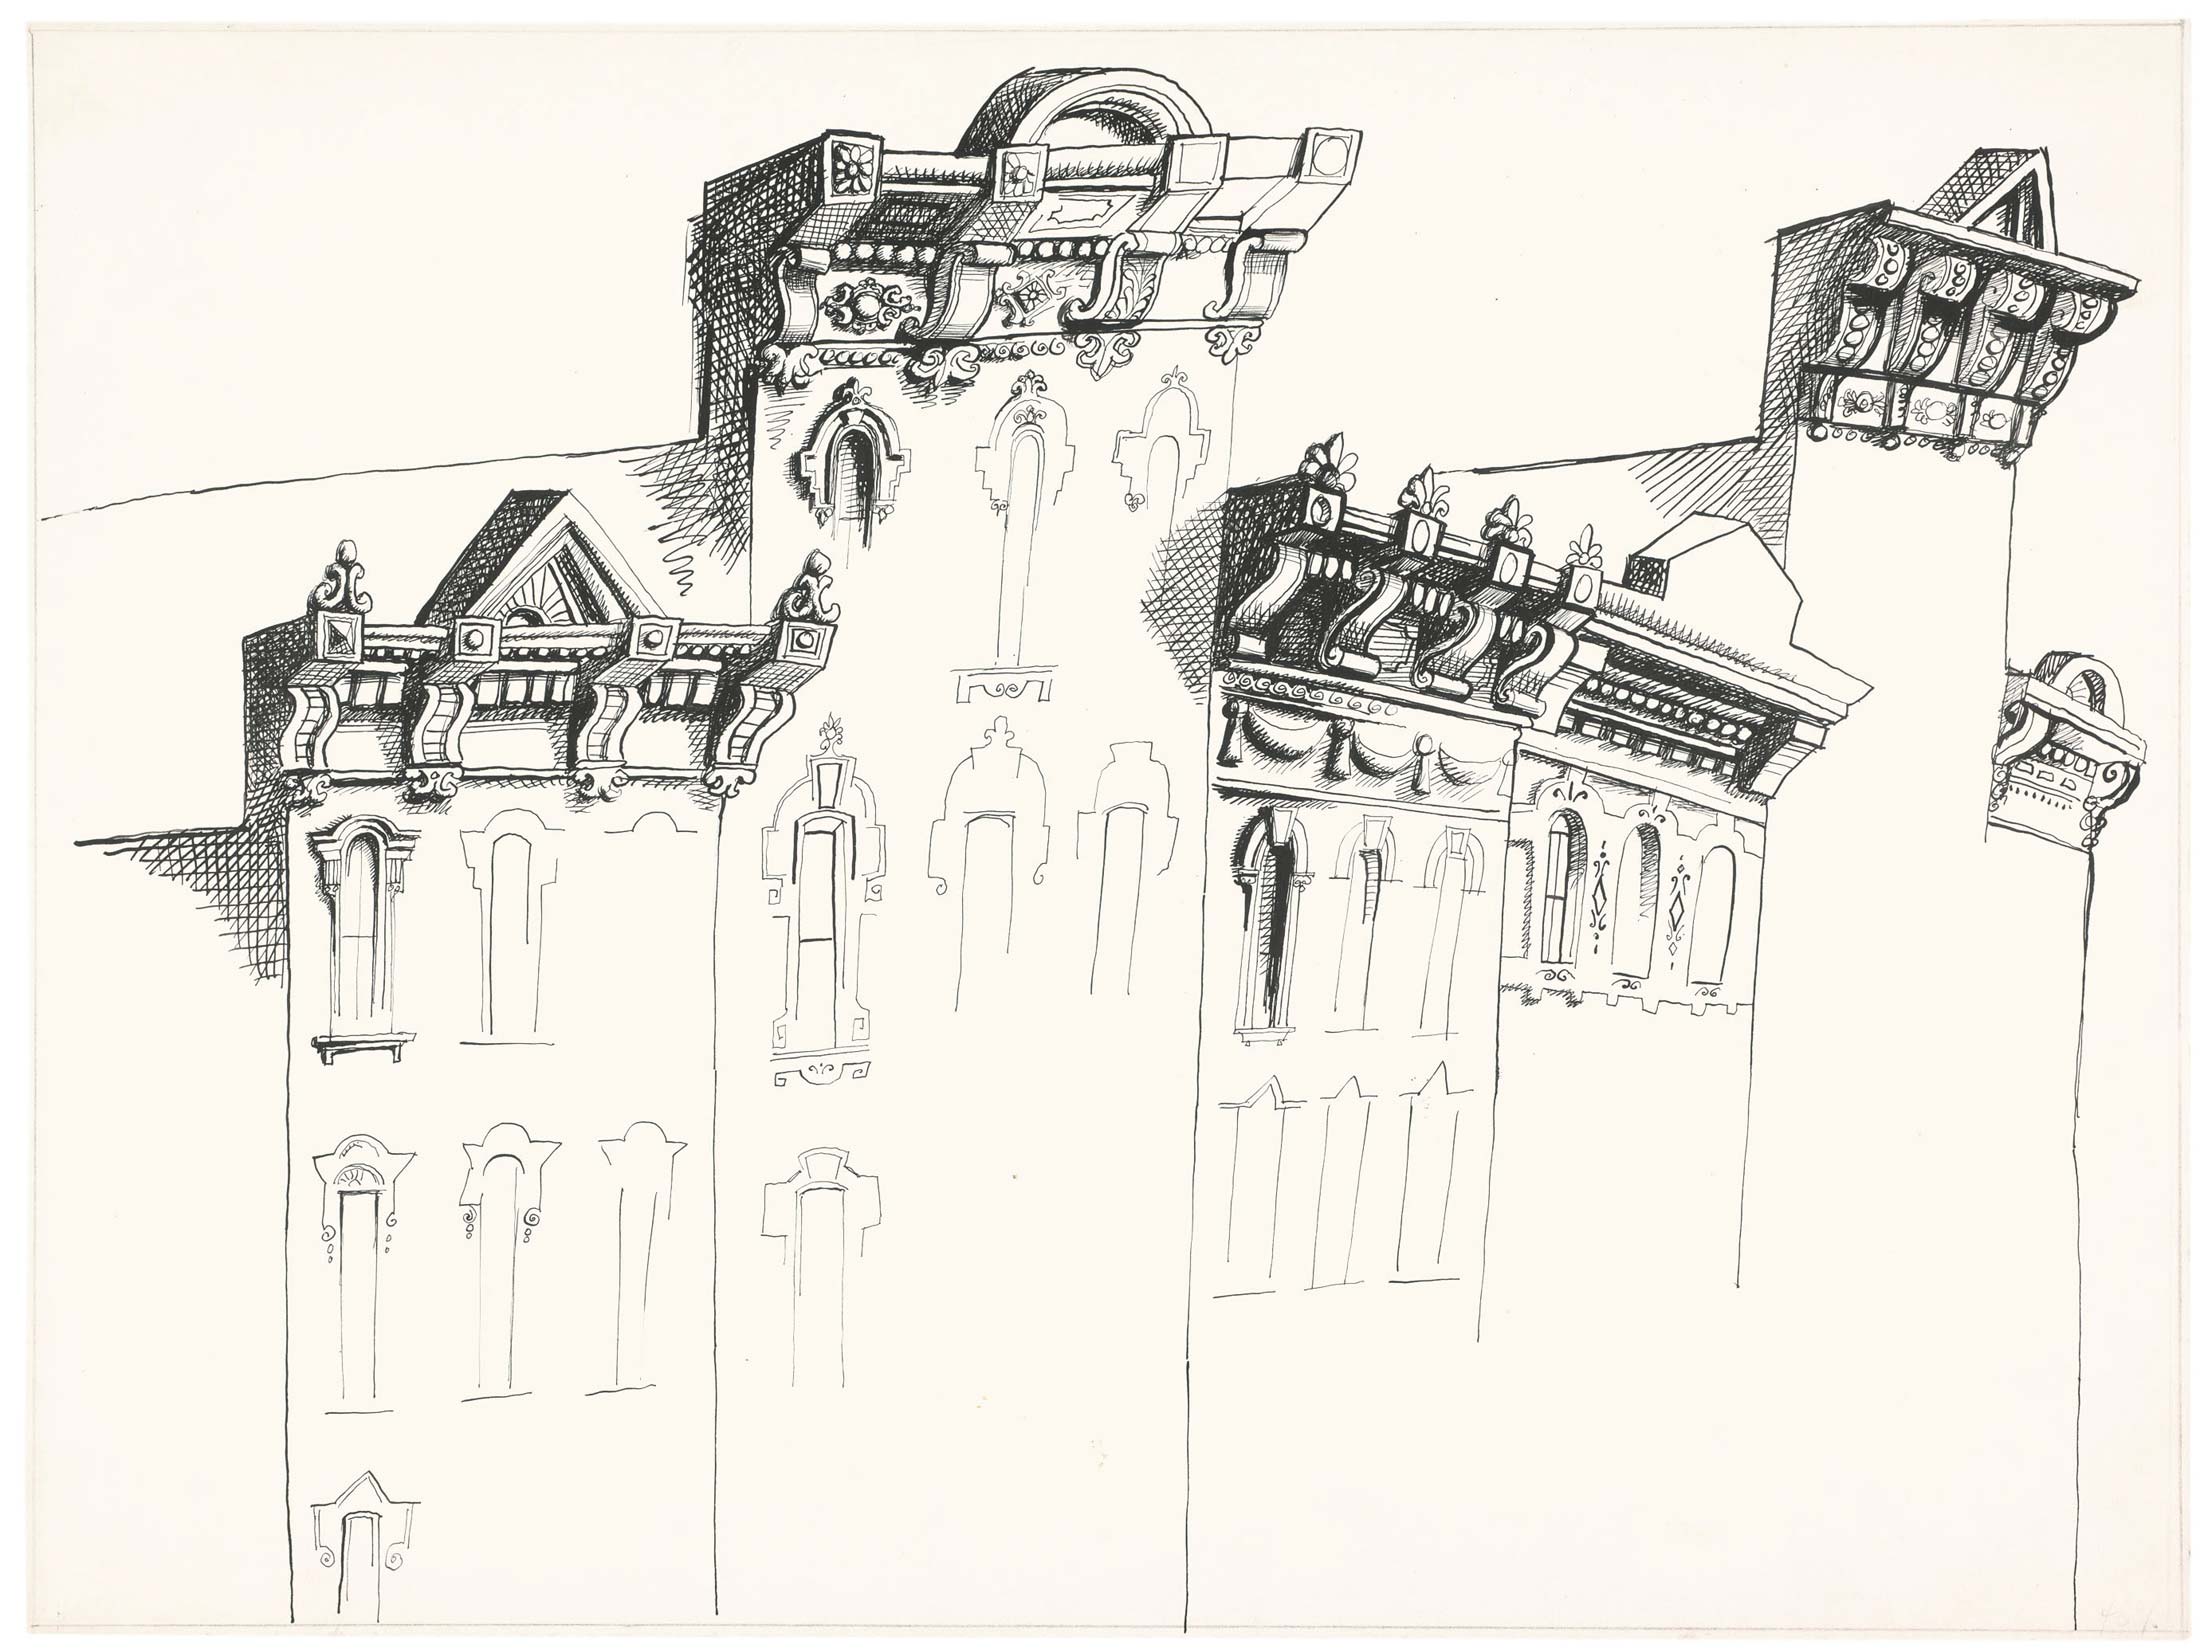 <em>Untitled</em>, 1951-52. Ink and pencil on paper, 114 ½ x 19 3/8 in. The Art Institute of Chicago; Gift of The Saul Steinberg Foundation.